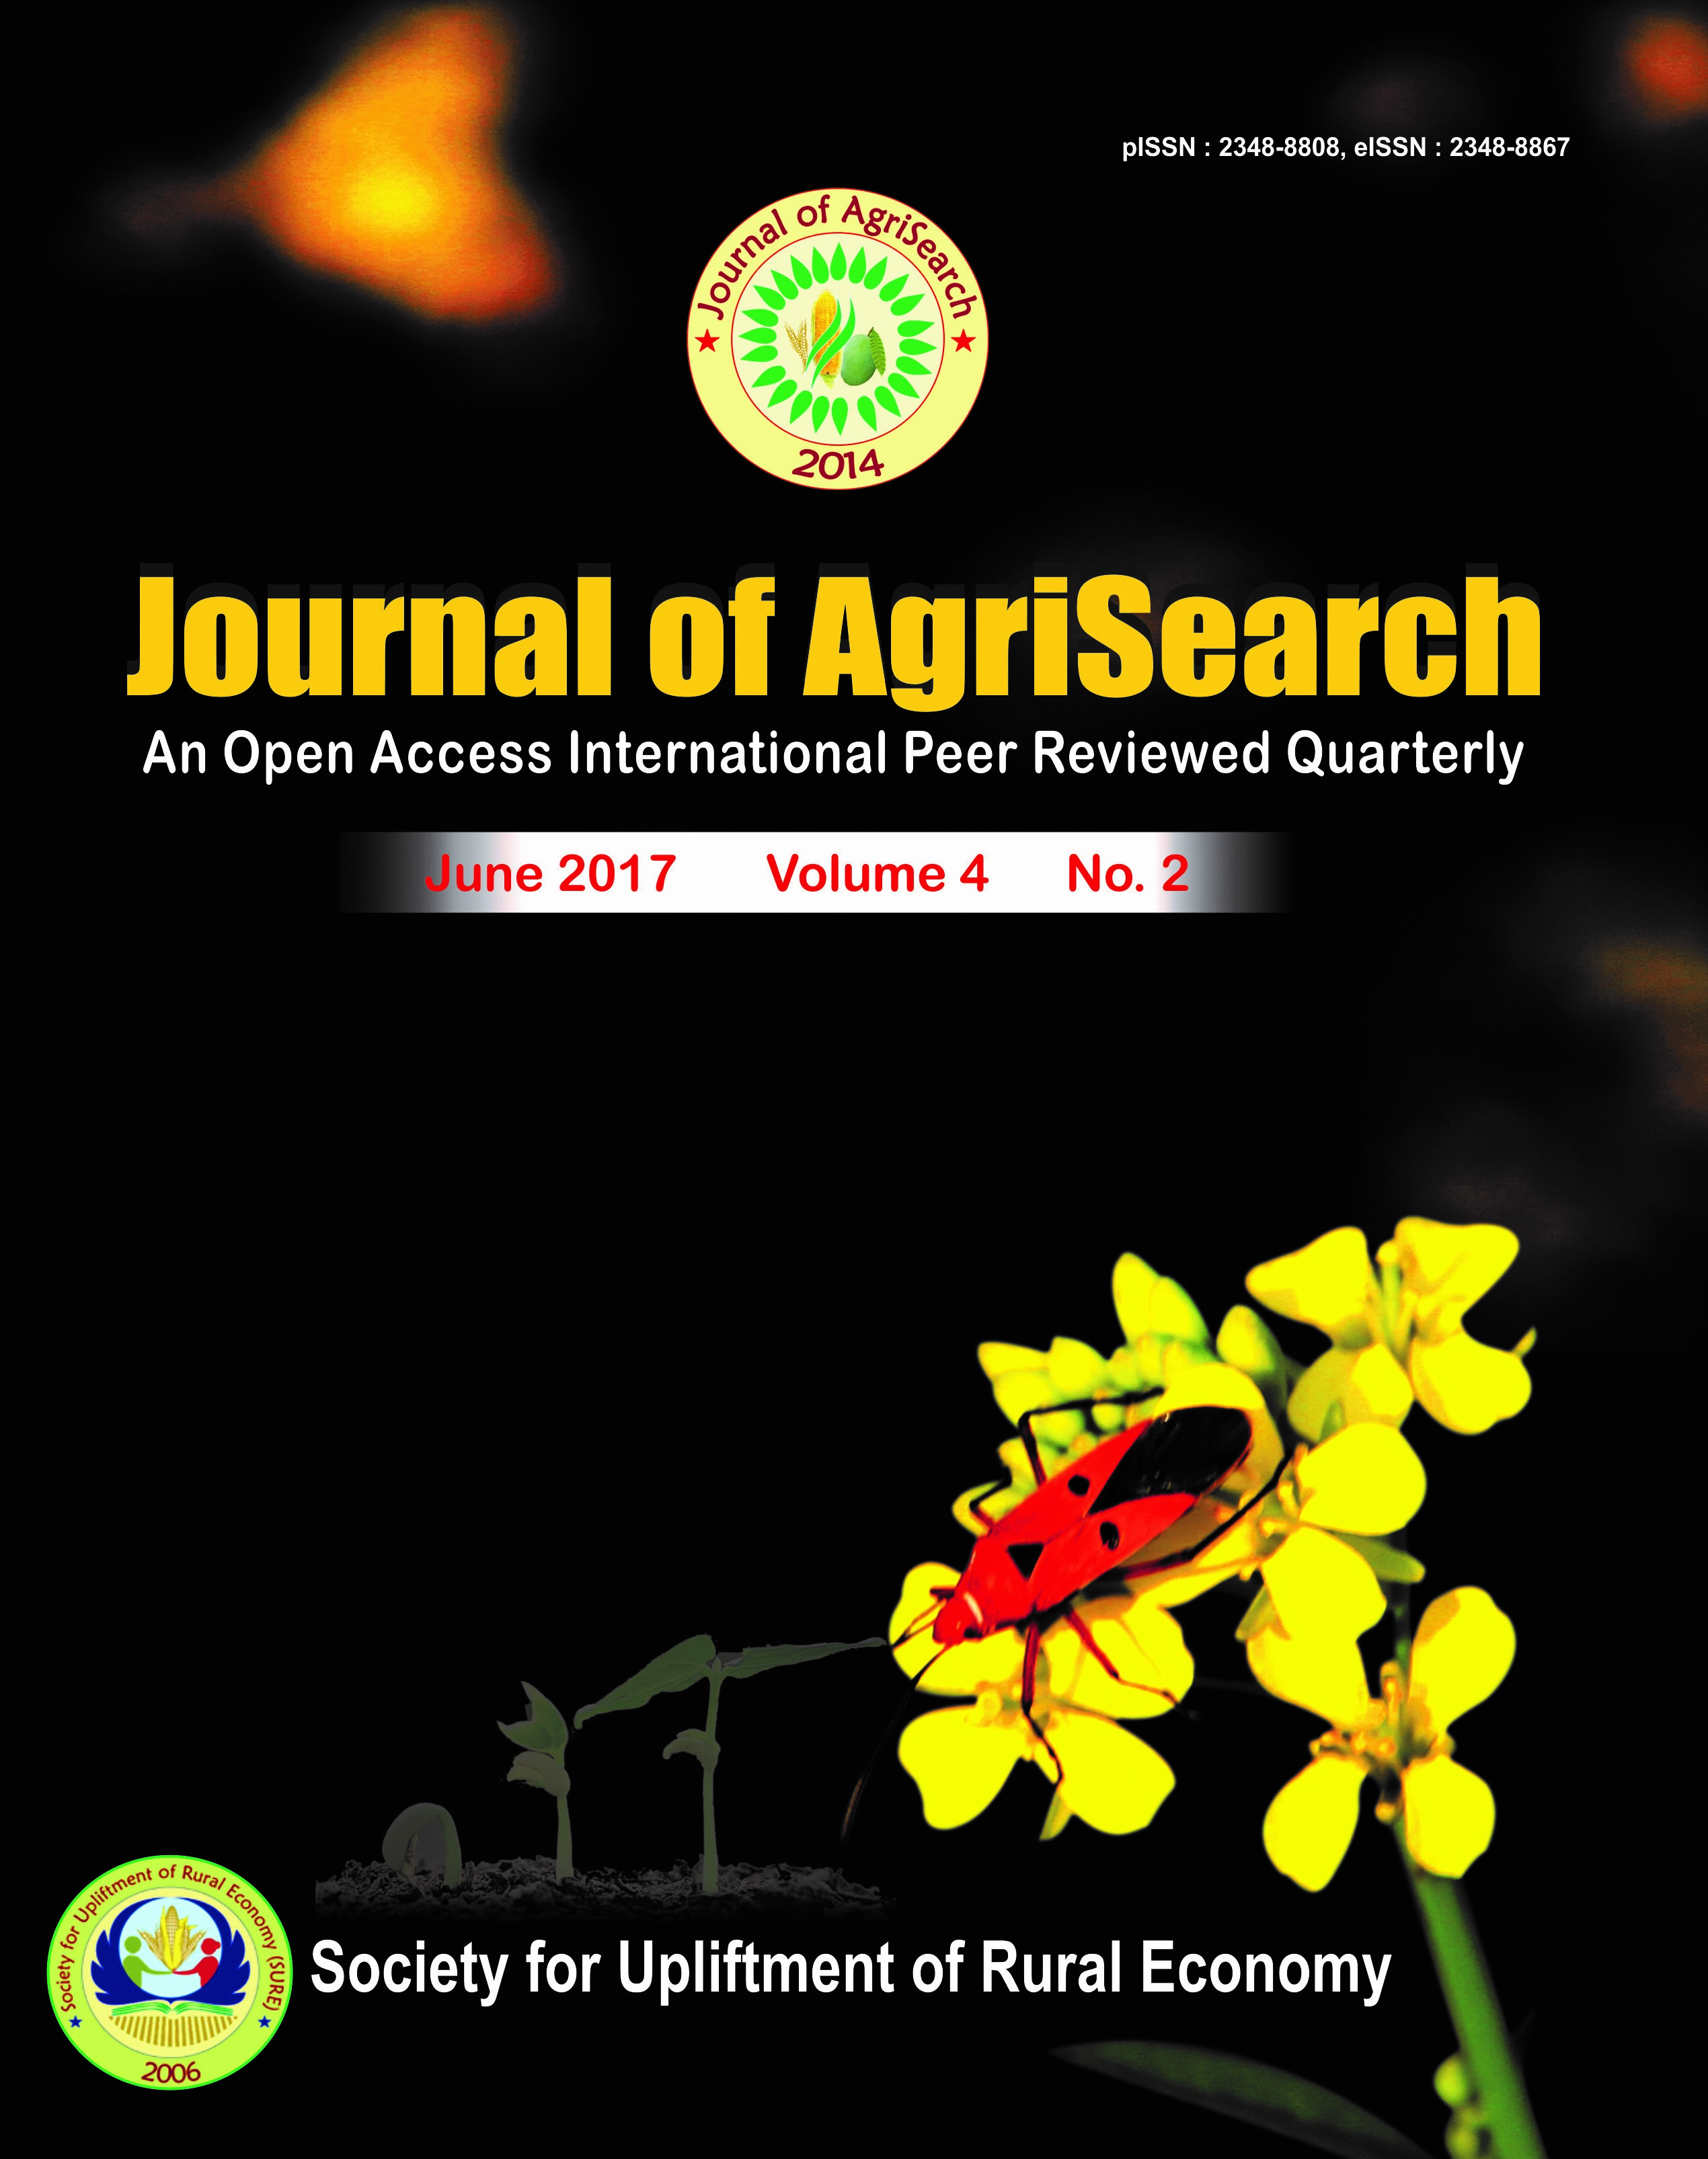 The Journal of AgriSearch (JAS) is official publication of Society for Upliftment of Rural Economy (SURE) Varanasi.  Journal of AgriSearch (JAS) is an open access journal, published quarterly in print (ISSN: 2348–8808) & Online (ISSN: 2348– 8867).  The Journal has four issues in a year: March, June, September and December, and contains Research Papers, Short Communications/Notes and Review Papers. All the papers are reviewed by a panel of reviewers for their scientific merit. The manuscript decisions are solely based on the results of peer reviews, and in order to eliminate any bias, reviewers Society accepts articles containing peer reviewed/referred original research article related to agricultural and allied sciences tending to  improve rural economy  for publication in the journal.